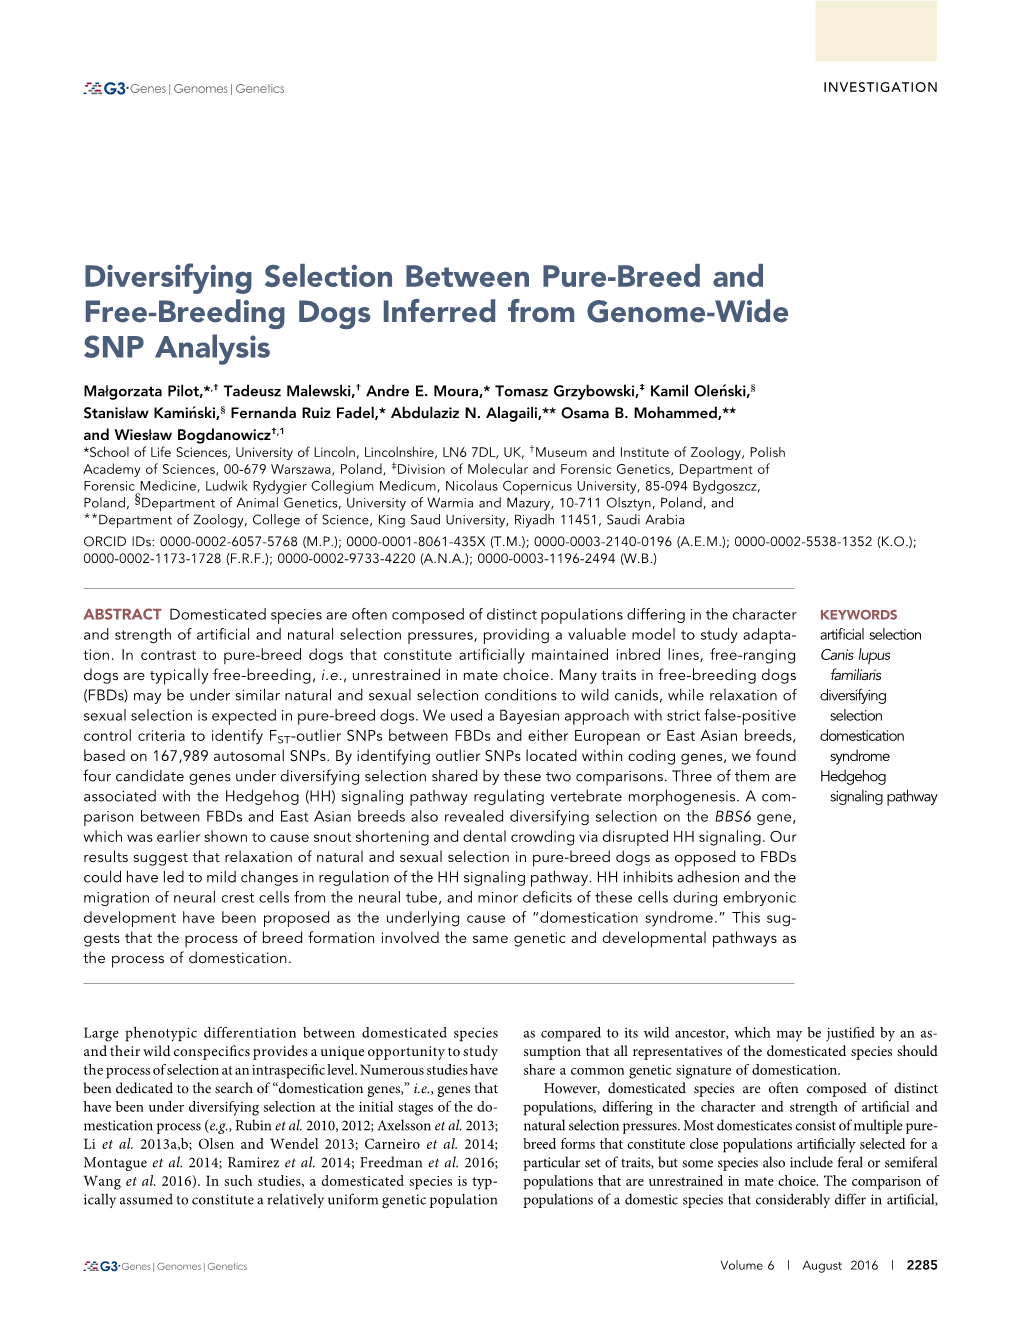 Diversifying Selection Between Pure-Breed and Free-Breeding Dogs Inferred from Genome-Wide SNP Analysis